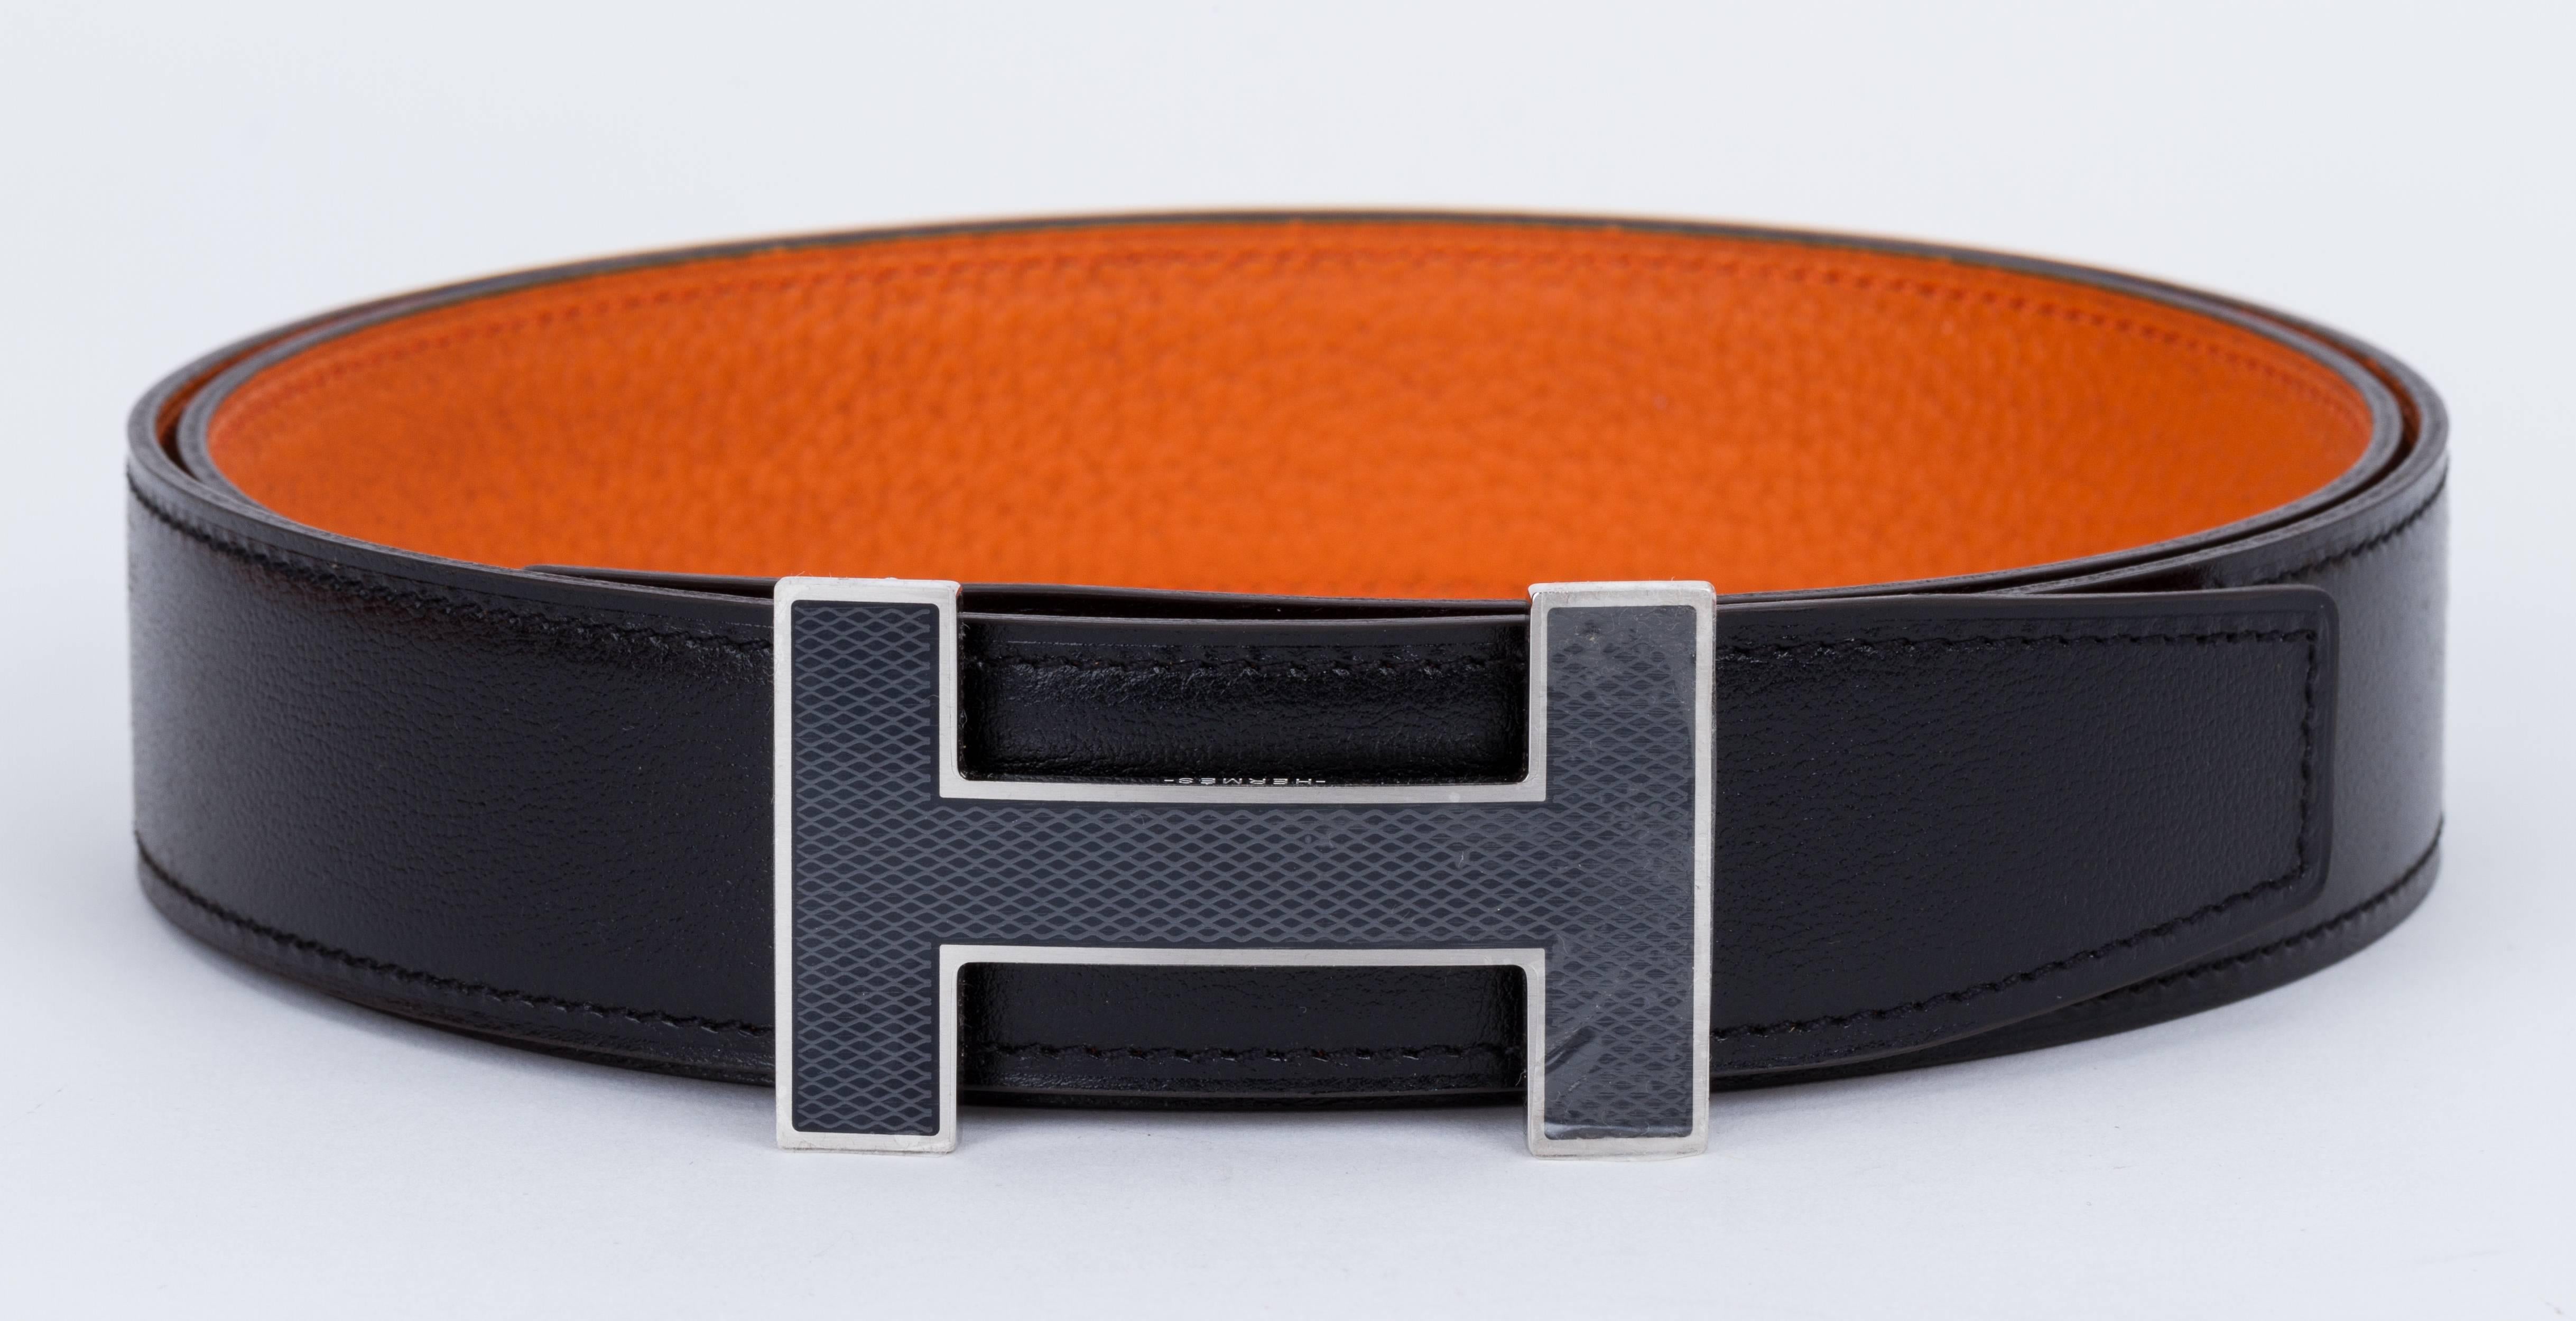 Hermes BNIB reversible unisex H belt, black box calf leather and orange togo. Black enamel and palladium H buckle. Date stamp A for 2017. European size 95. Comes with dust cover, box, ribbon and dust bag.
